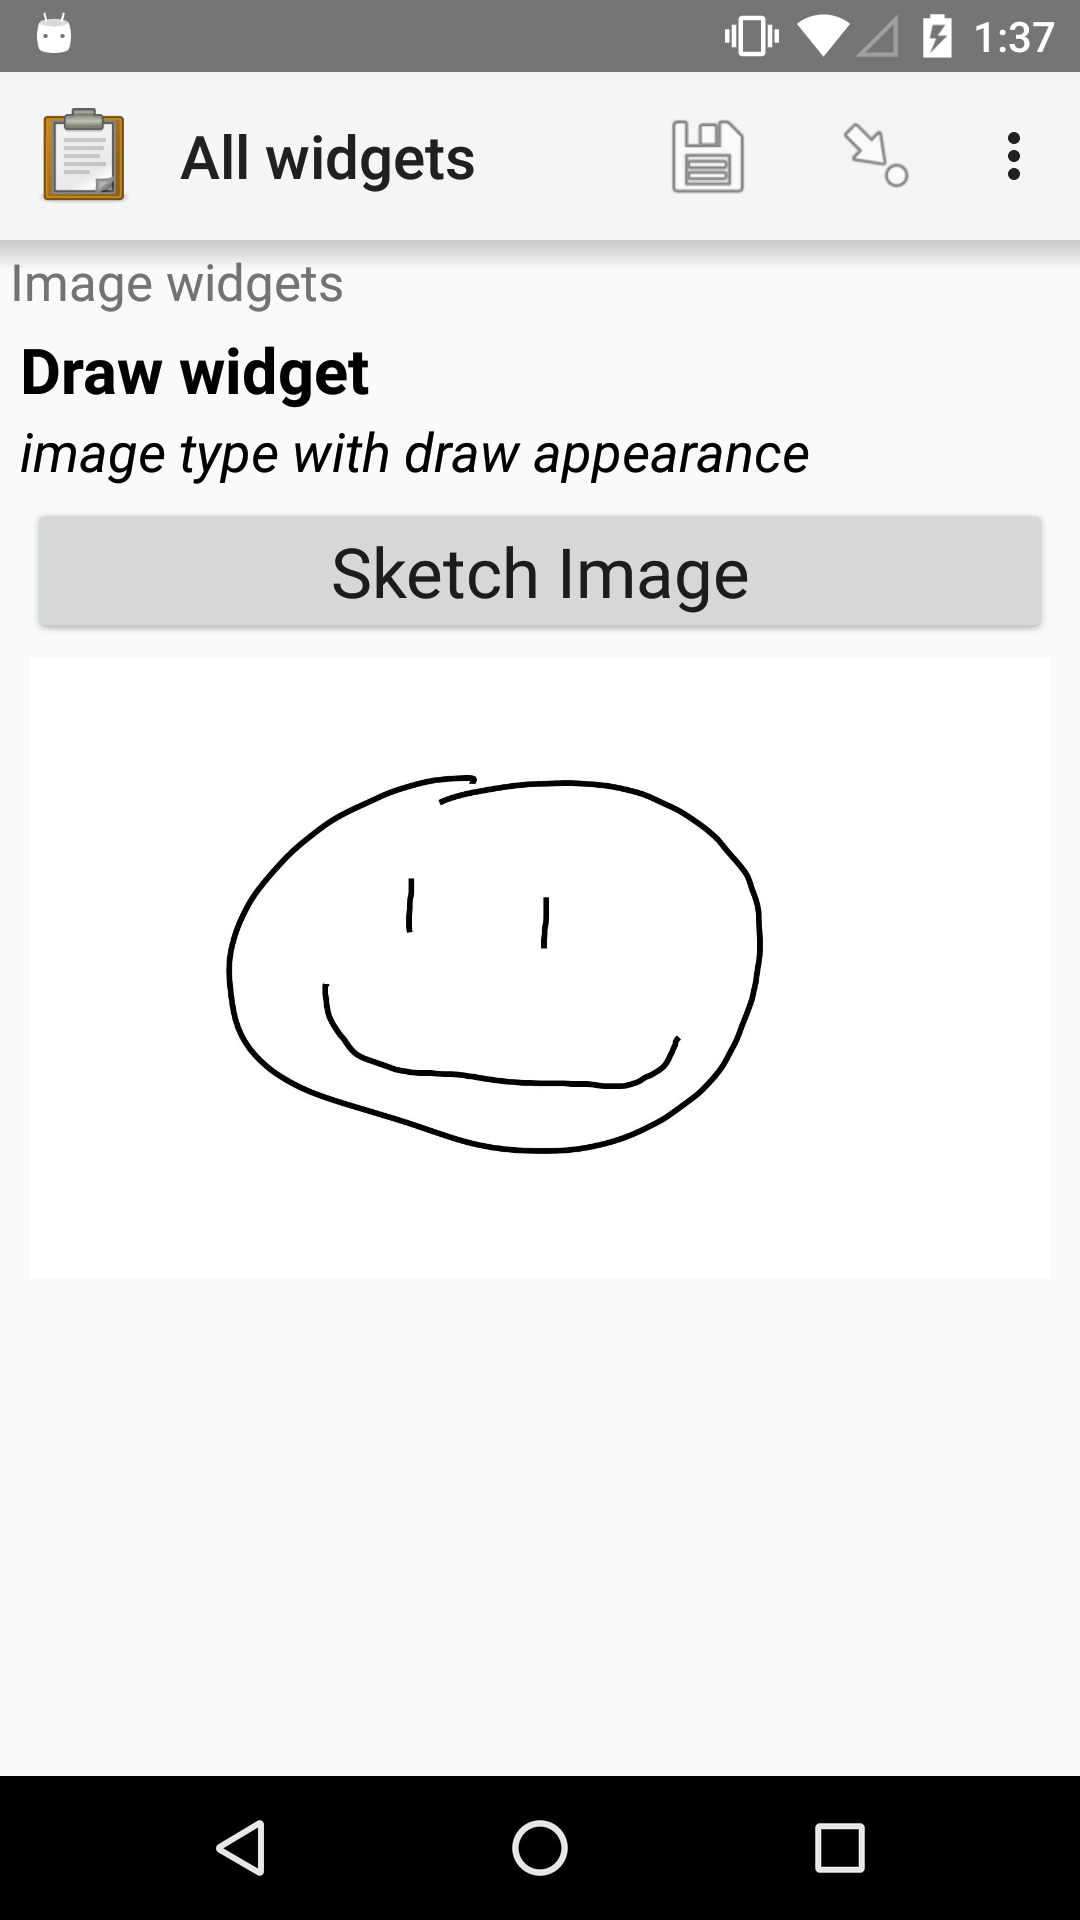 The Draw widget as displayed previously. Below the "Sketch Image" button is the smiley face from the drawing pad image shown previously.